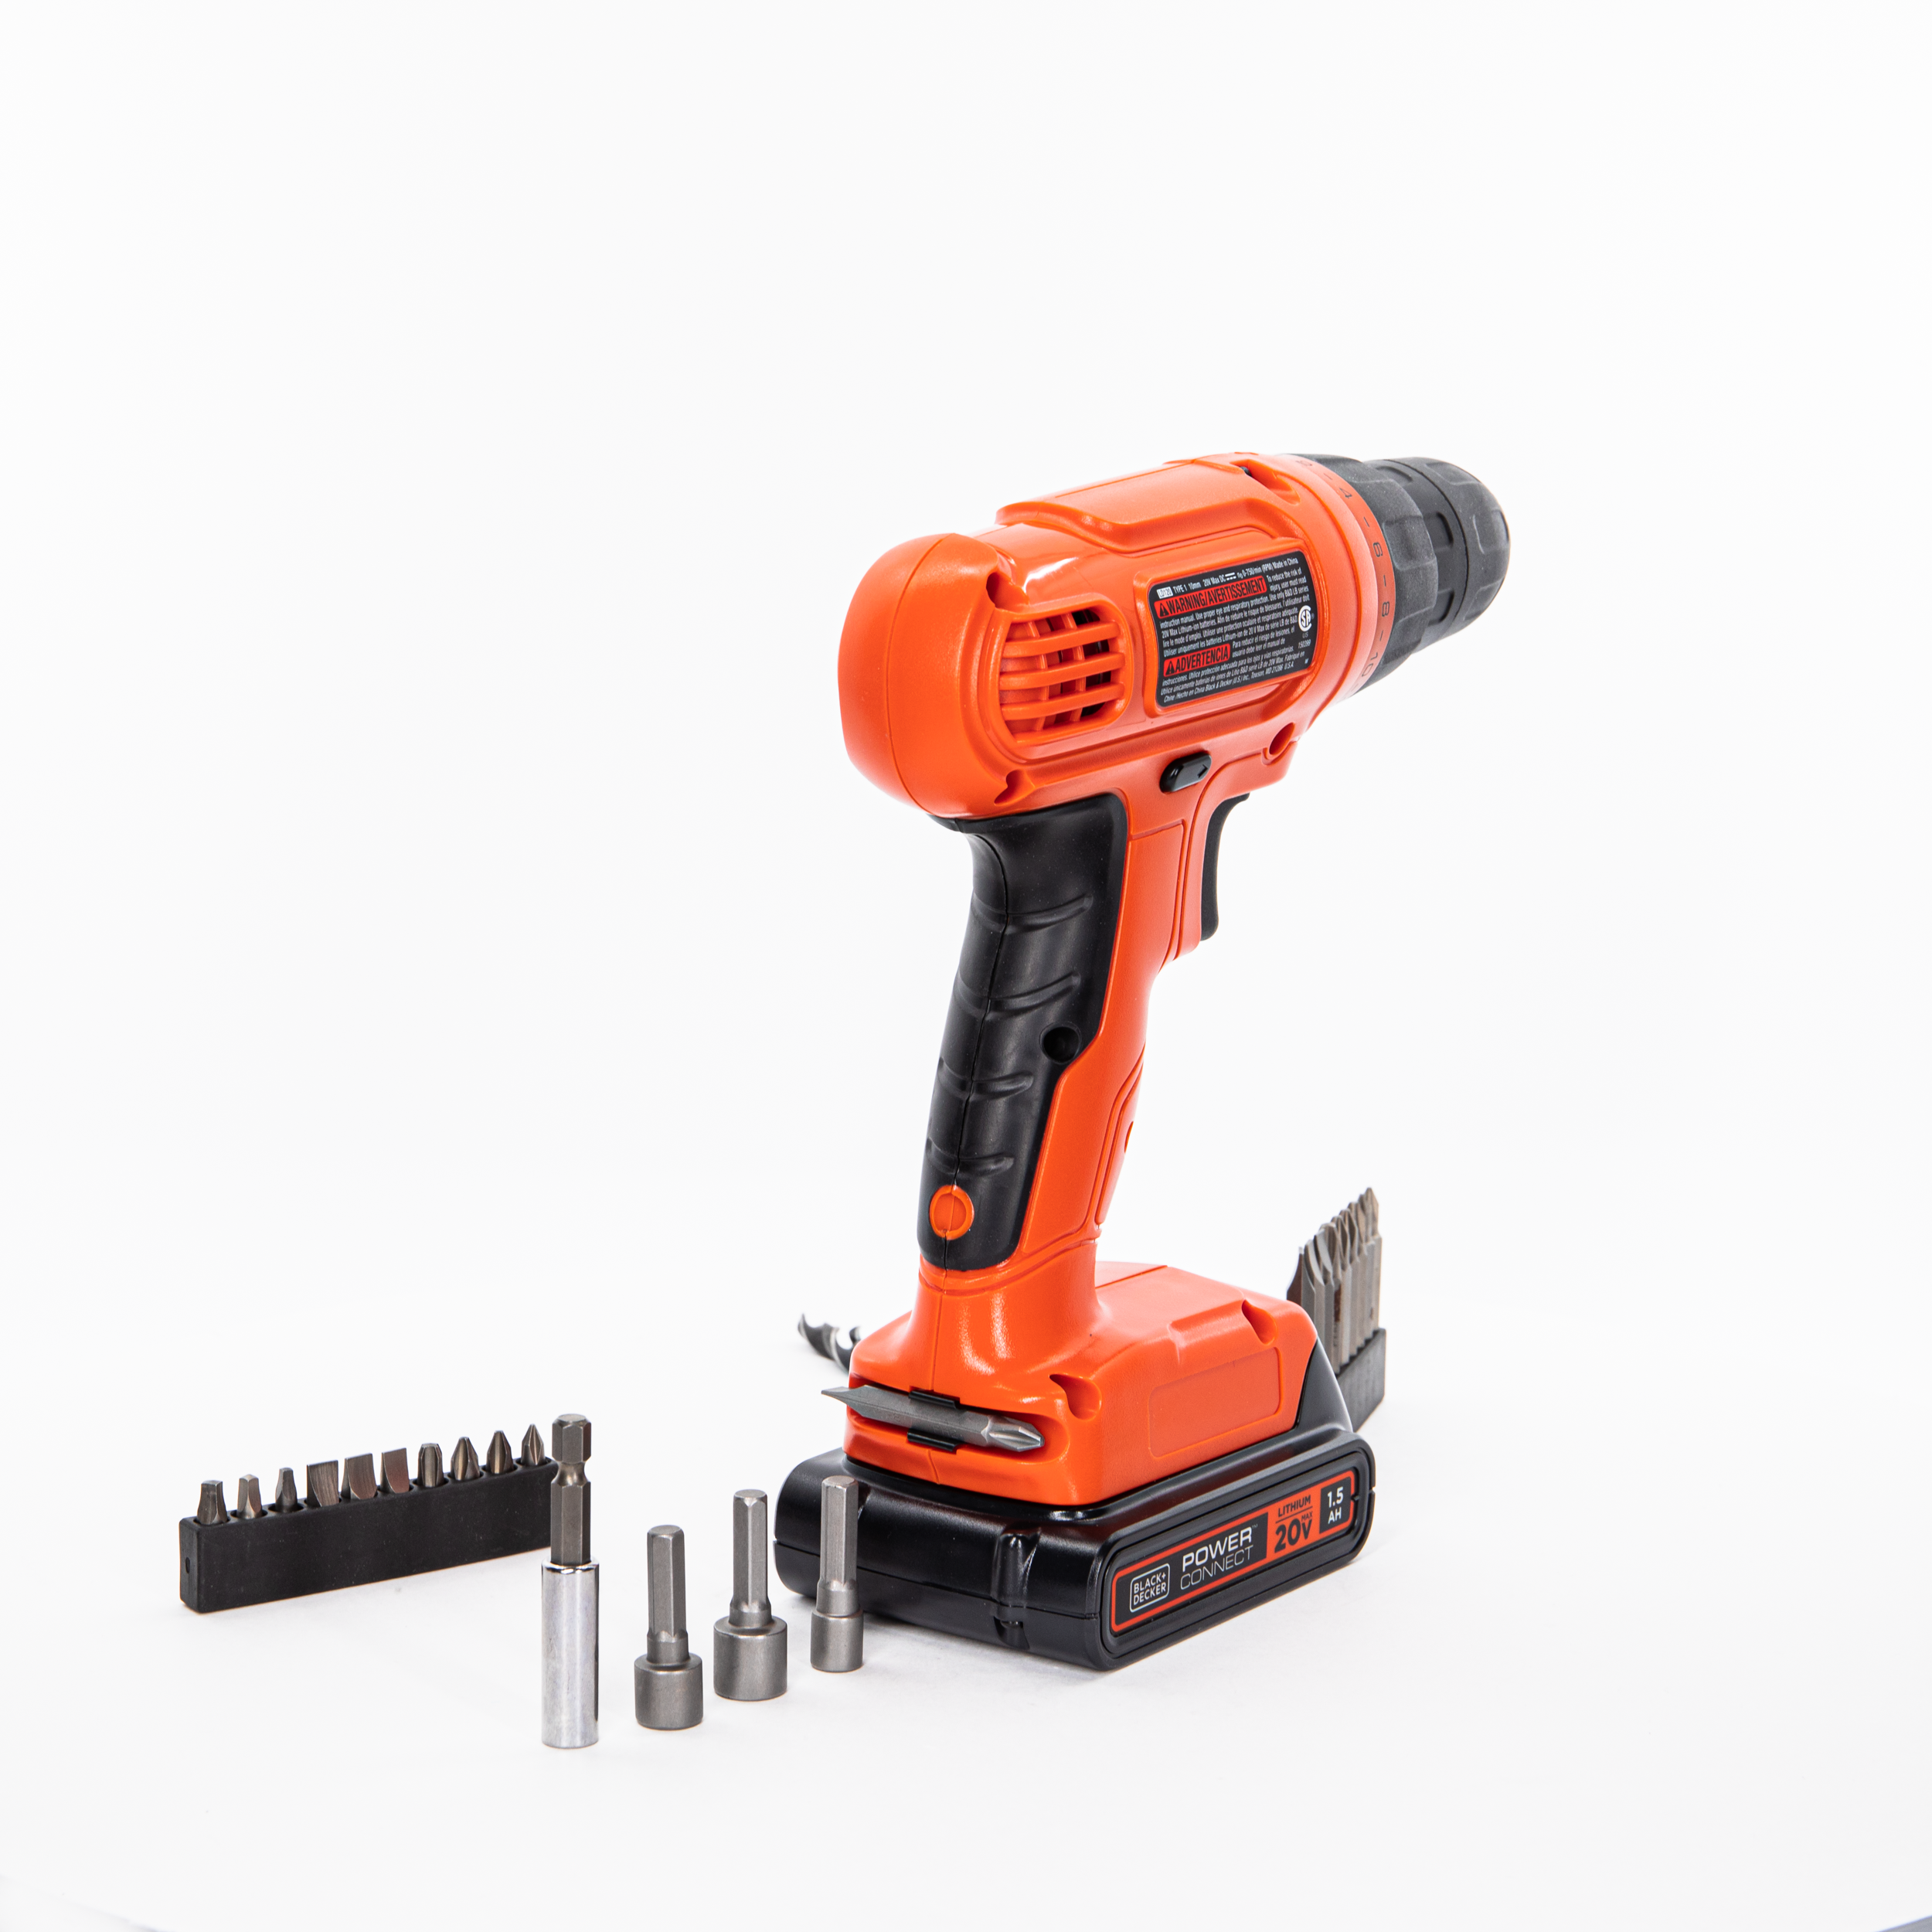 BLACK+DECKER 20V MAX POWER-CONNECT CORDLESS DRILLERDRIVER 30 PC KIT REVIEW.  